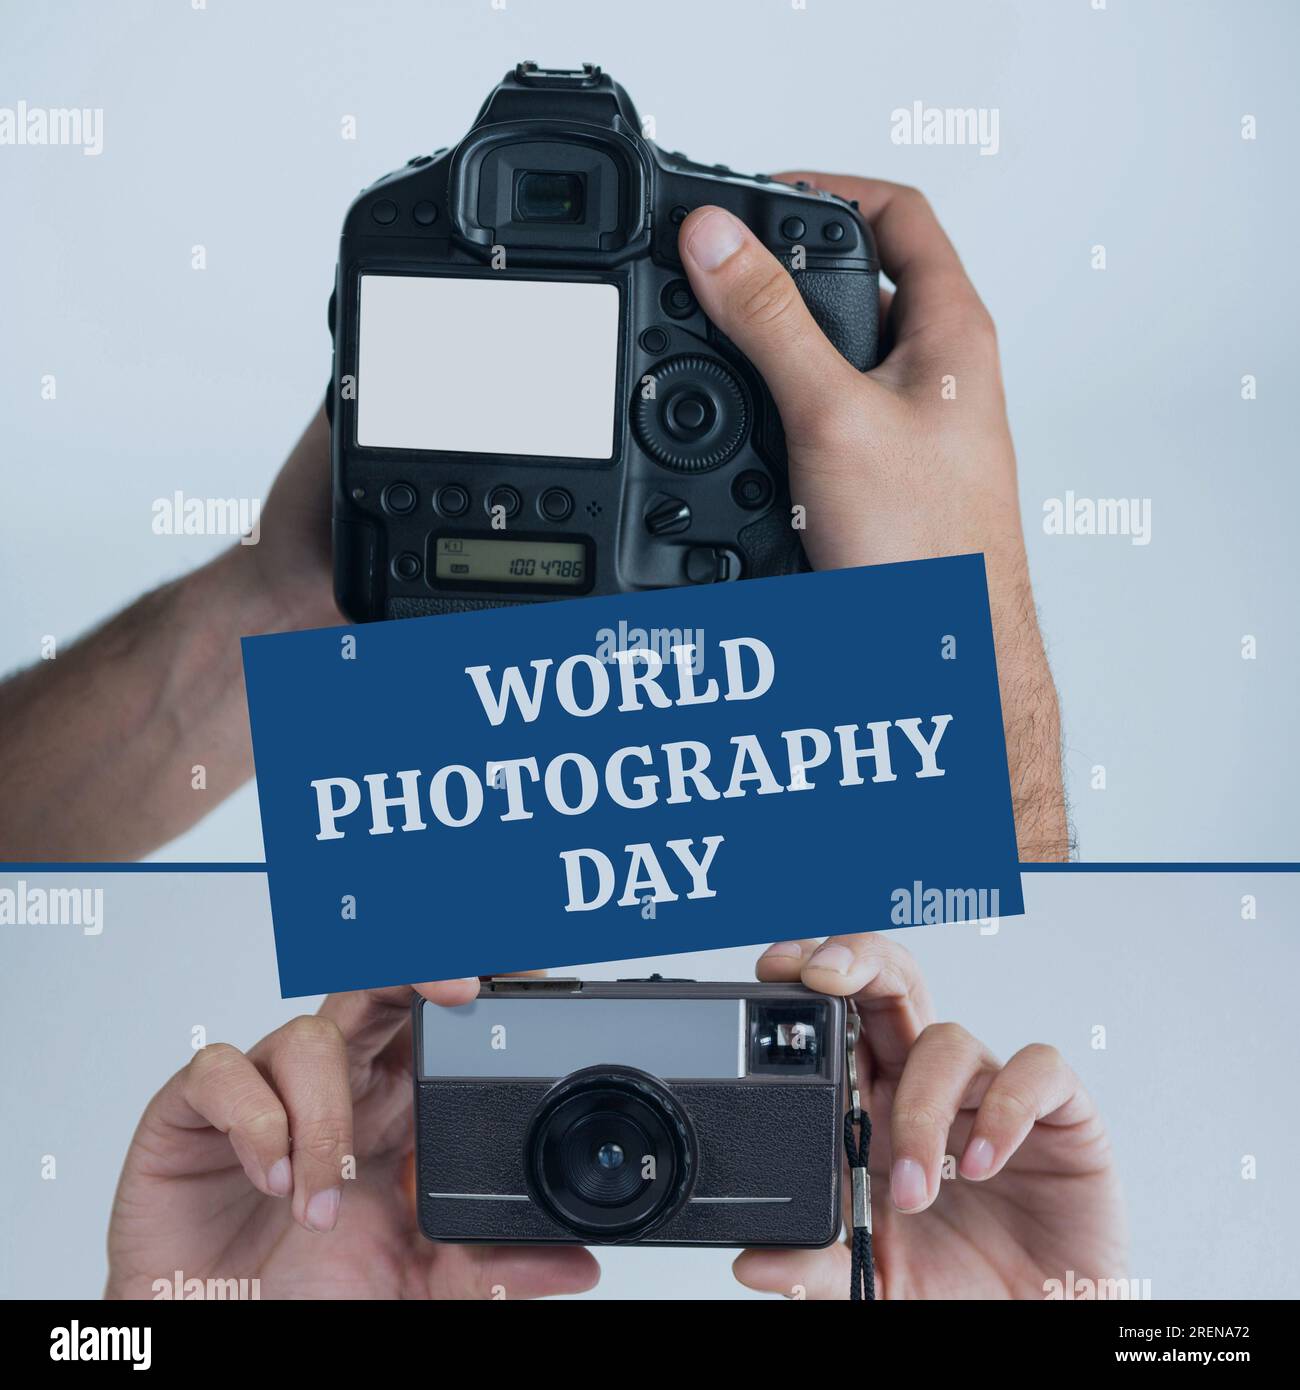 World photography day text on blue over diverse hands holding digital slr and compact cameras Stock Photo